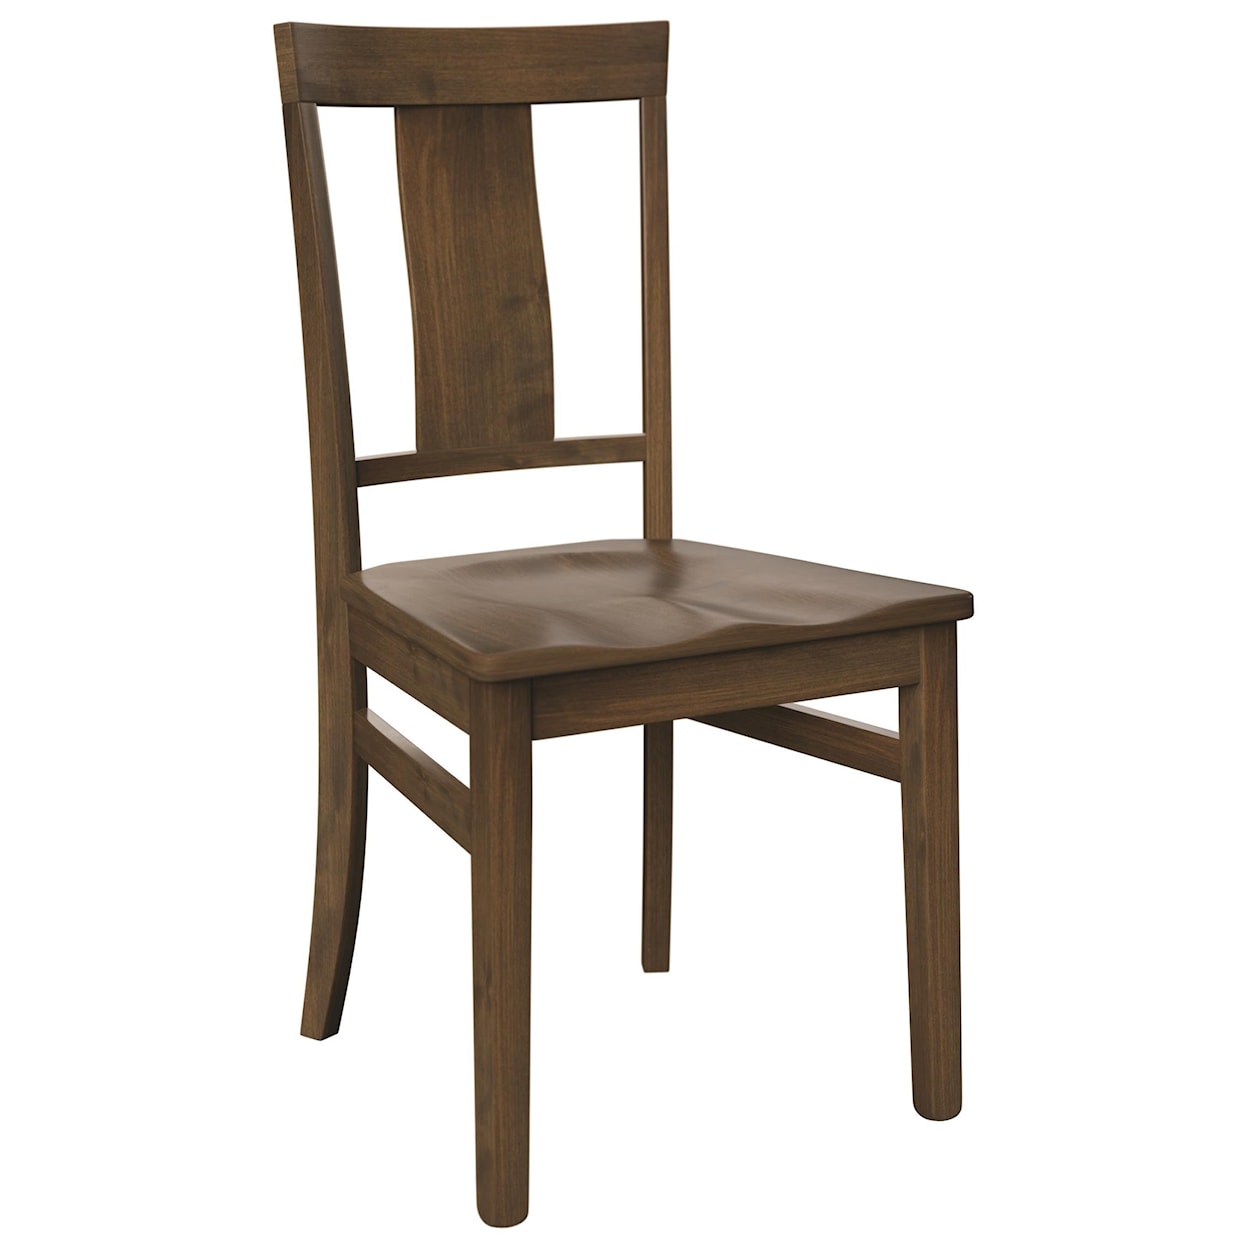 Wengerd Wood Products Tennessee Side Chair